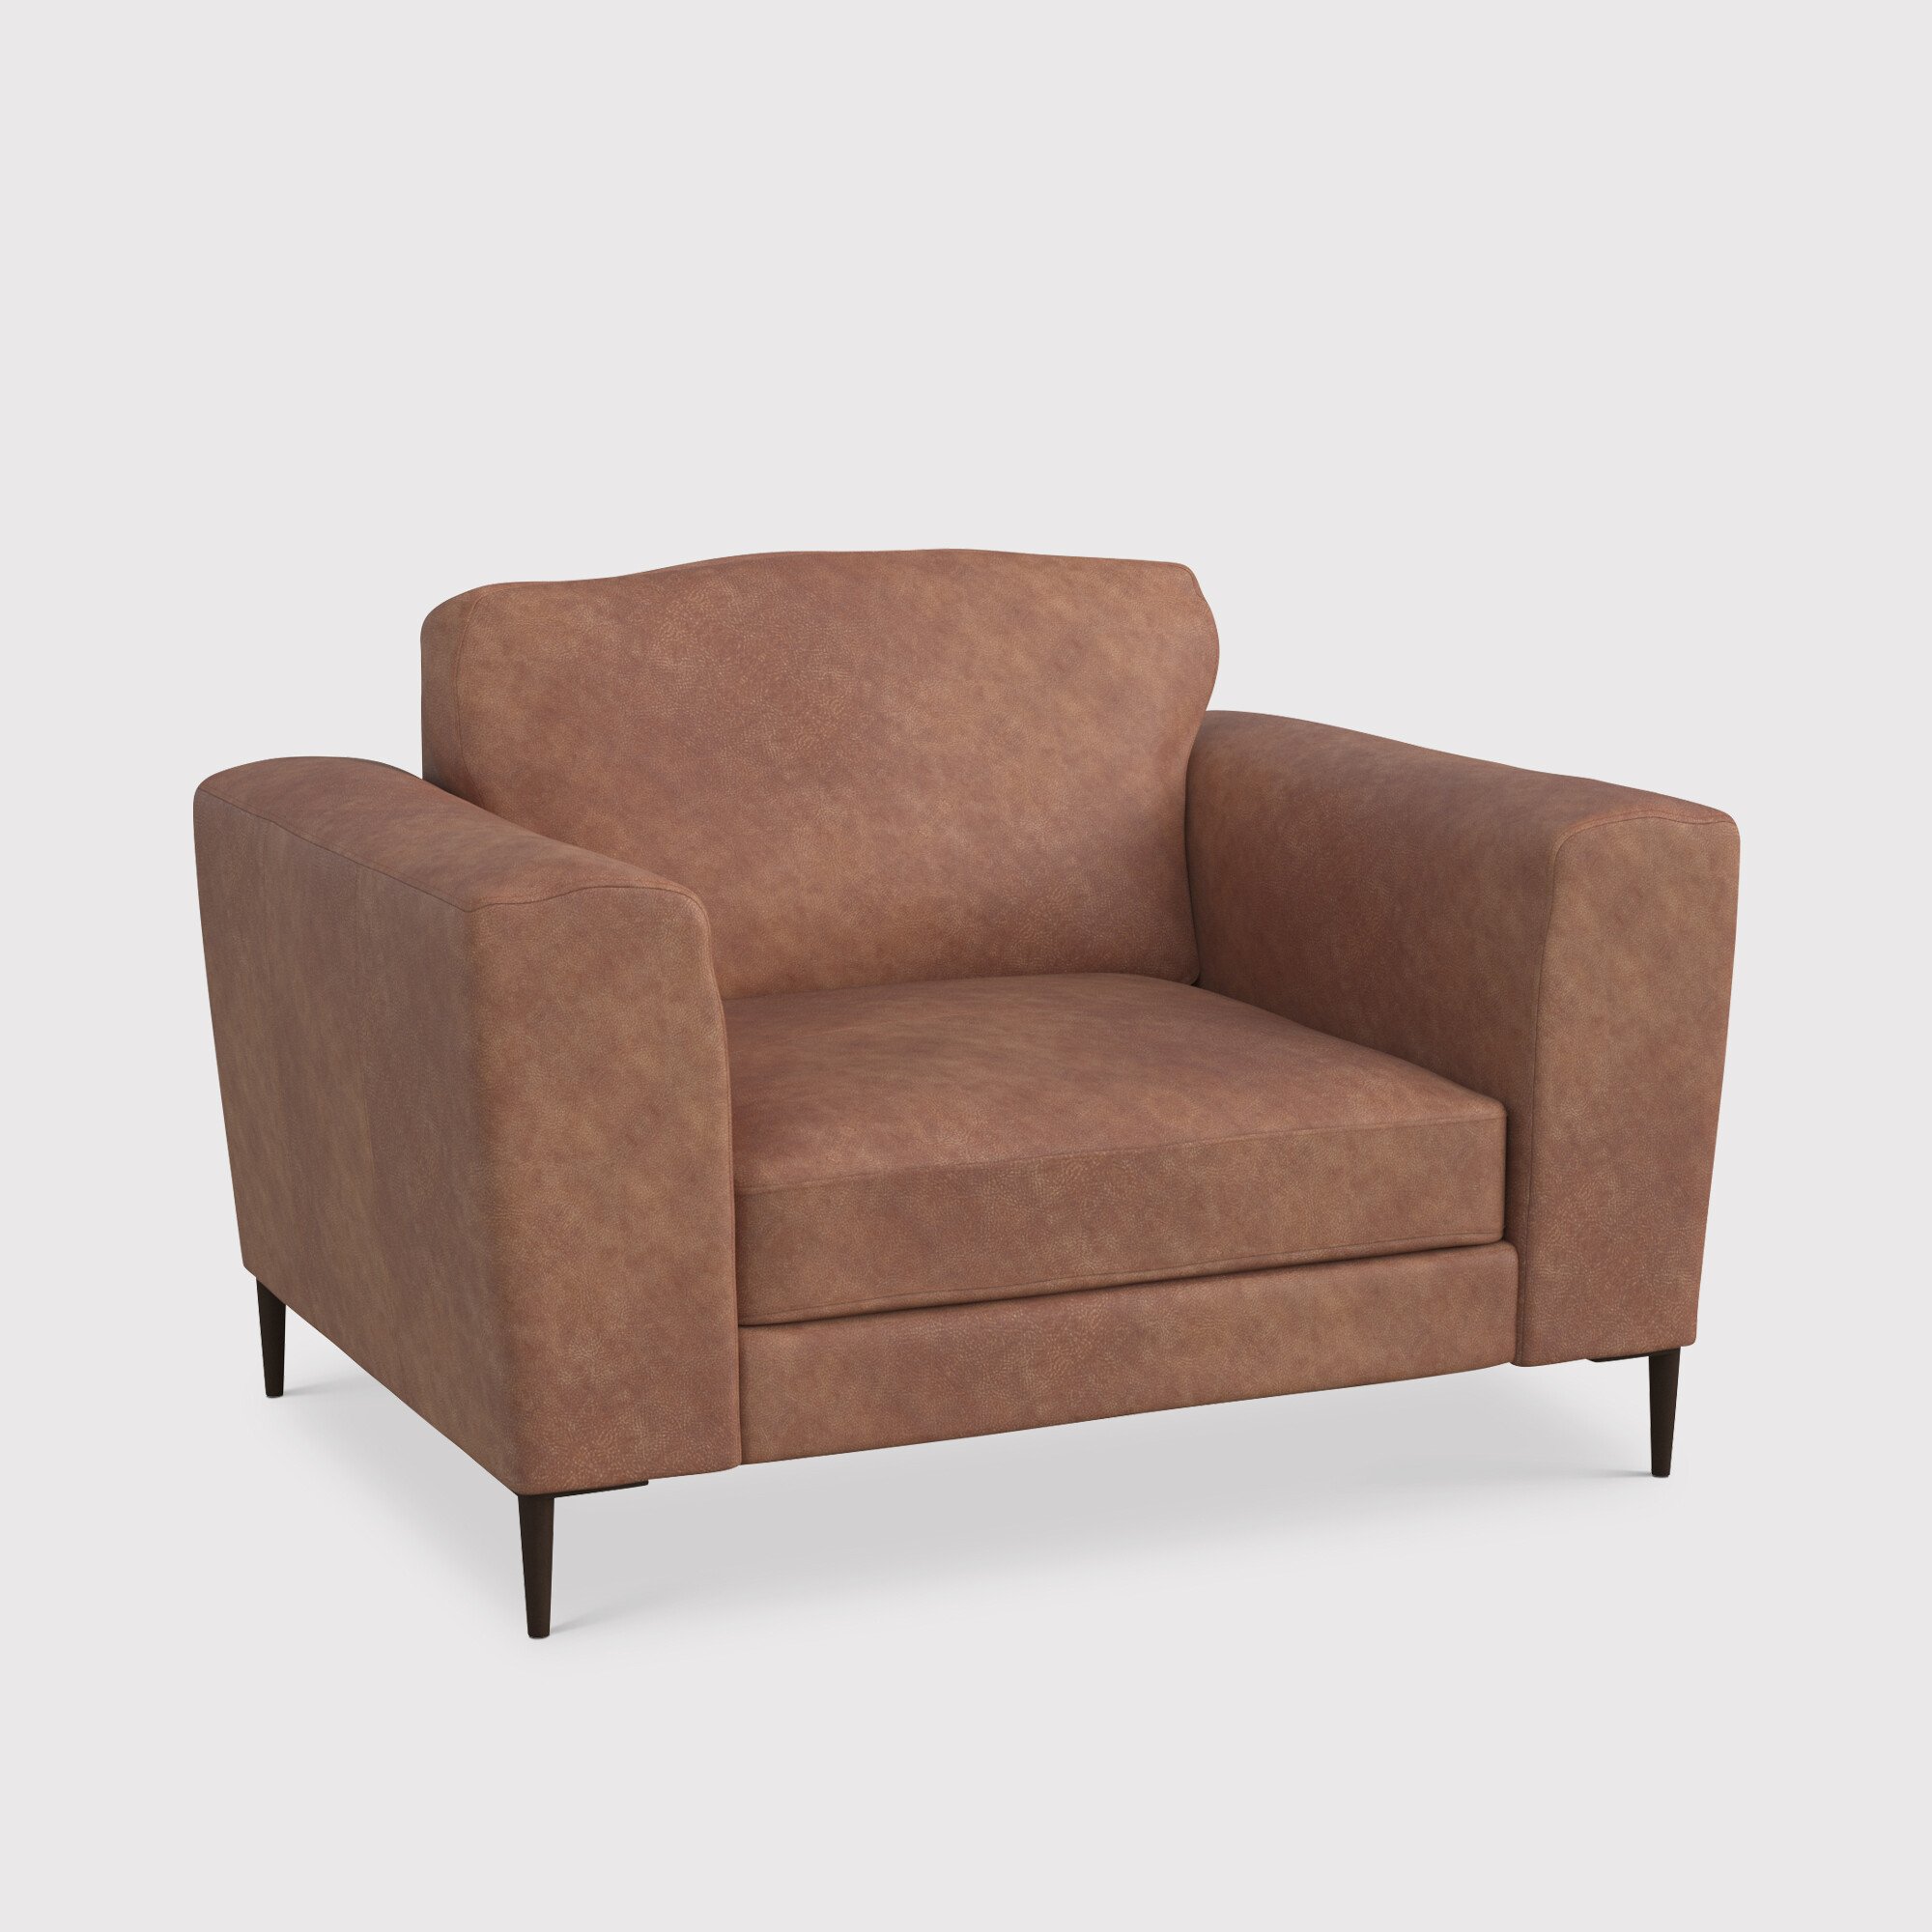 Troy Maxi Snuggle Chair, Brown Leather | Barker & Stonehouse